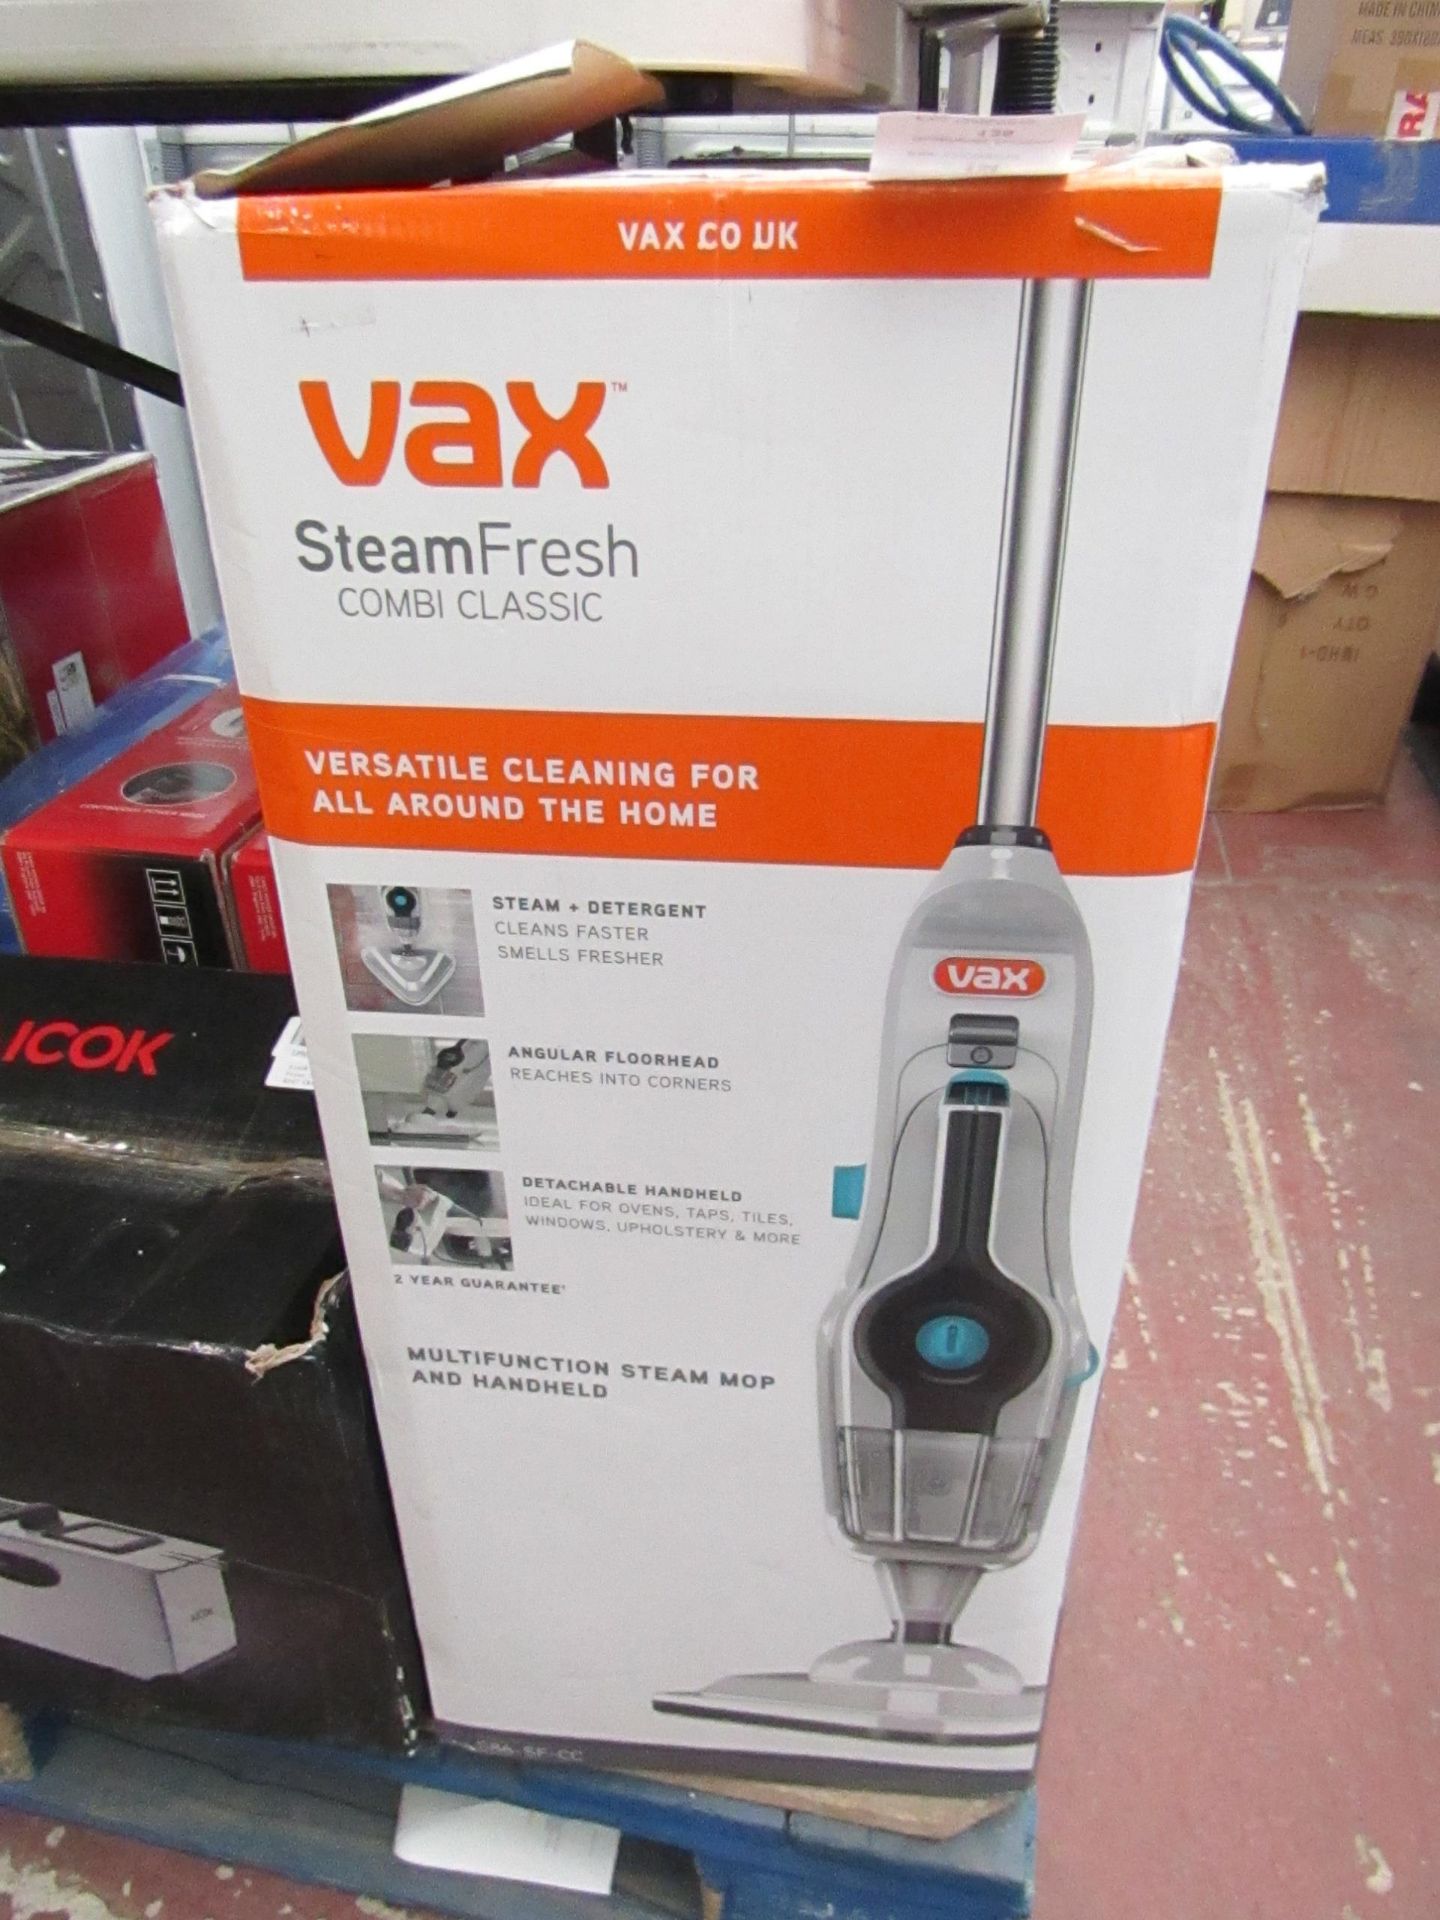 Vax Steam fresh Combi Classsic Steam Mop, bOxed nad Powers on, RRp £69.99